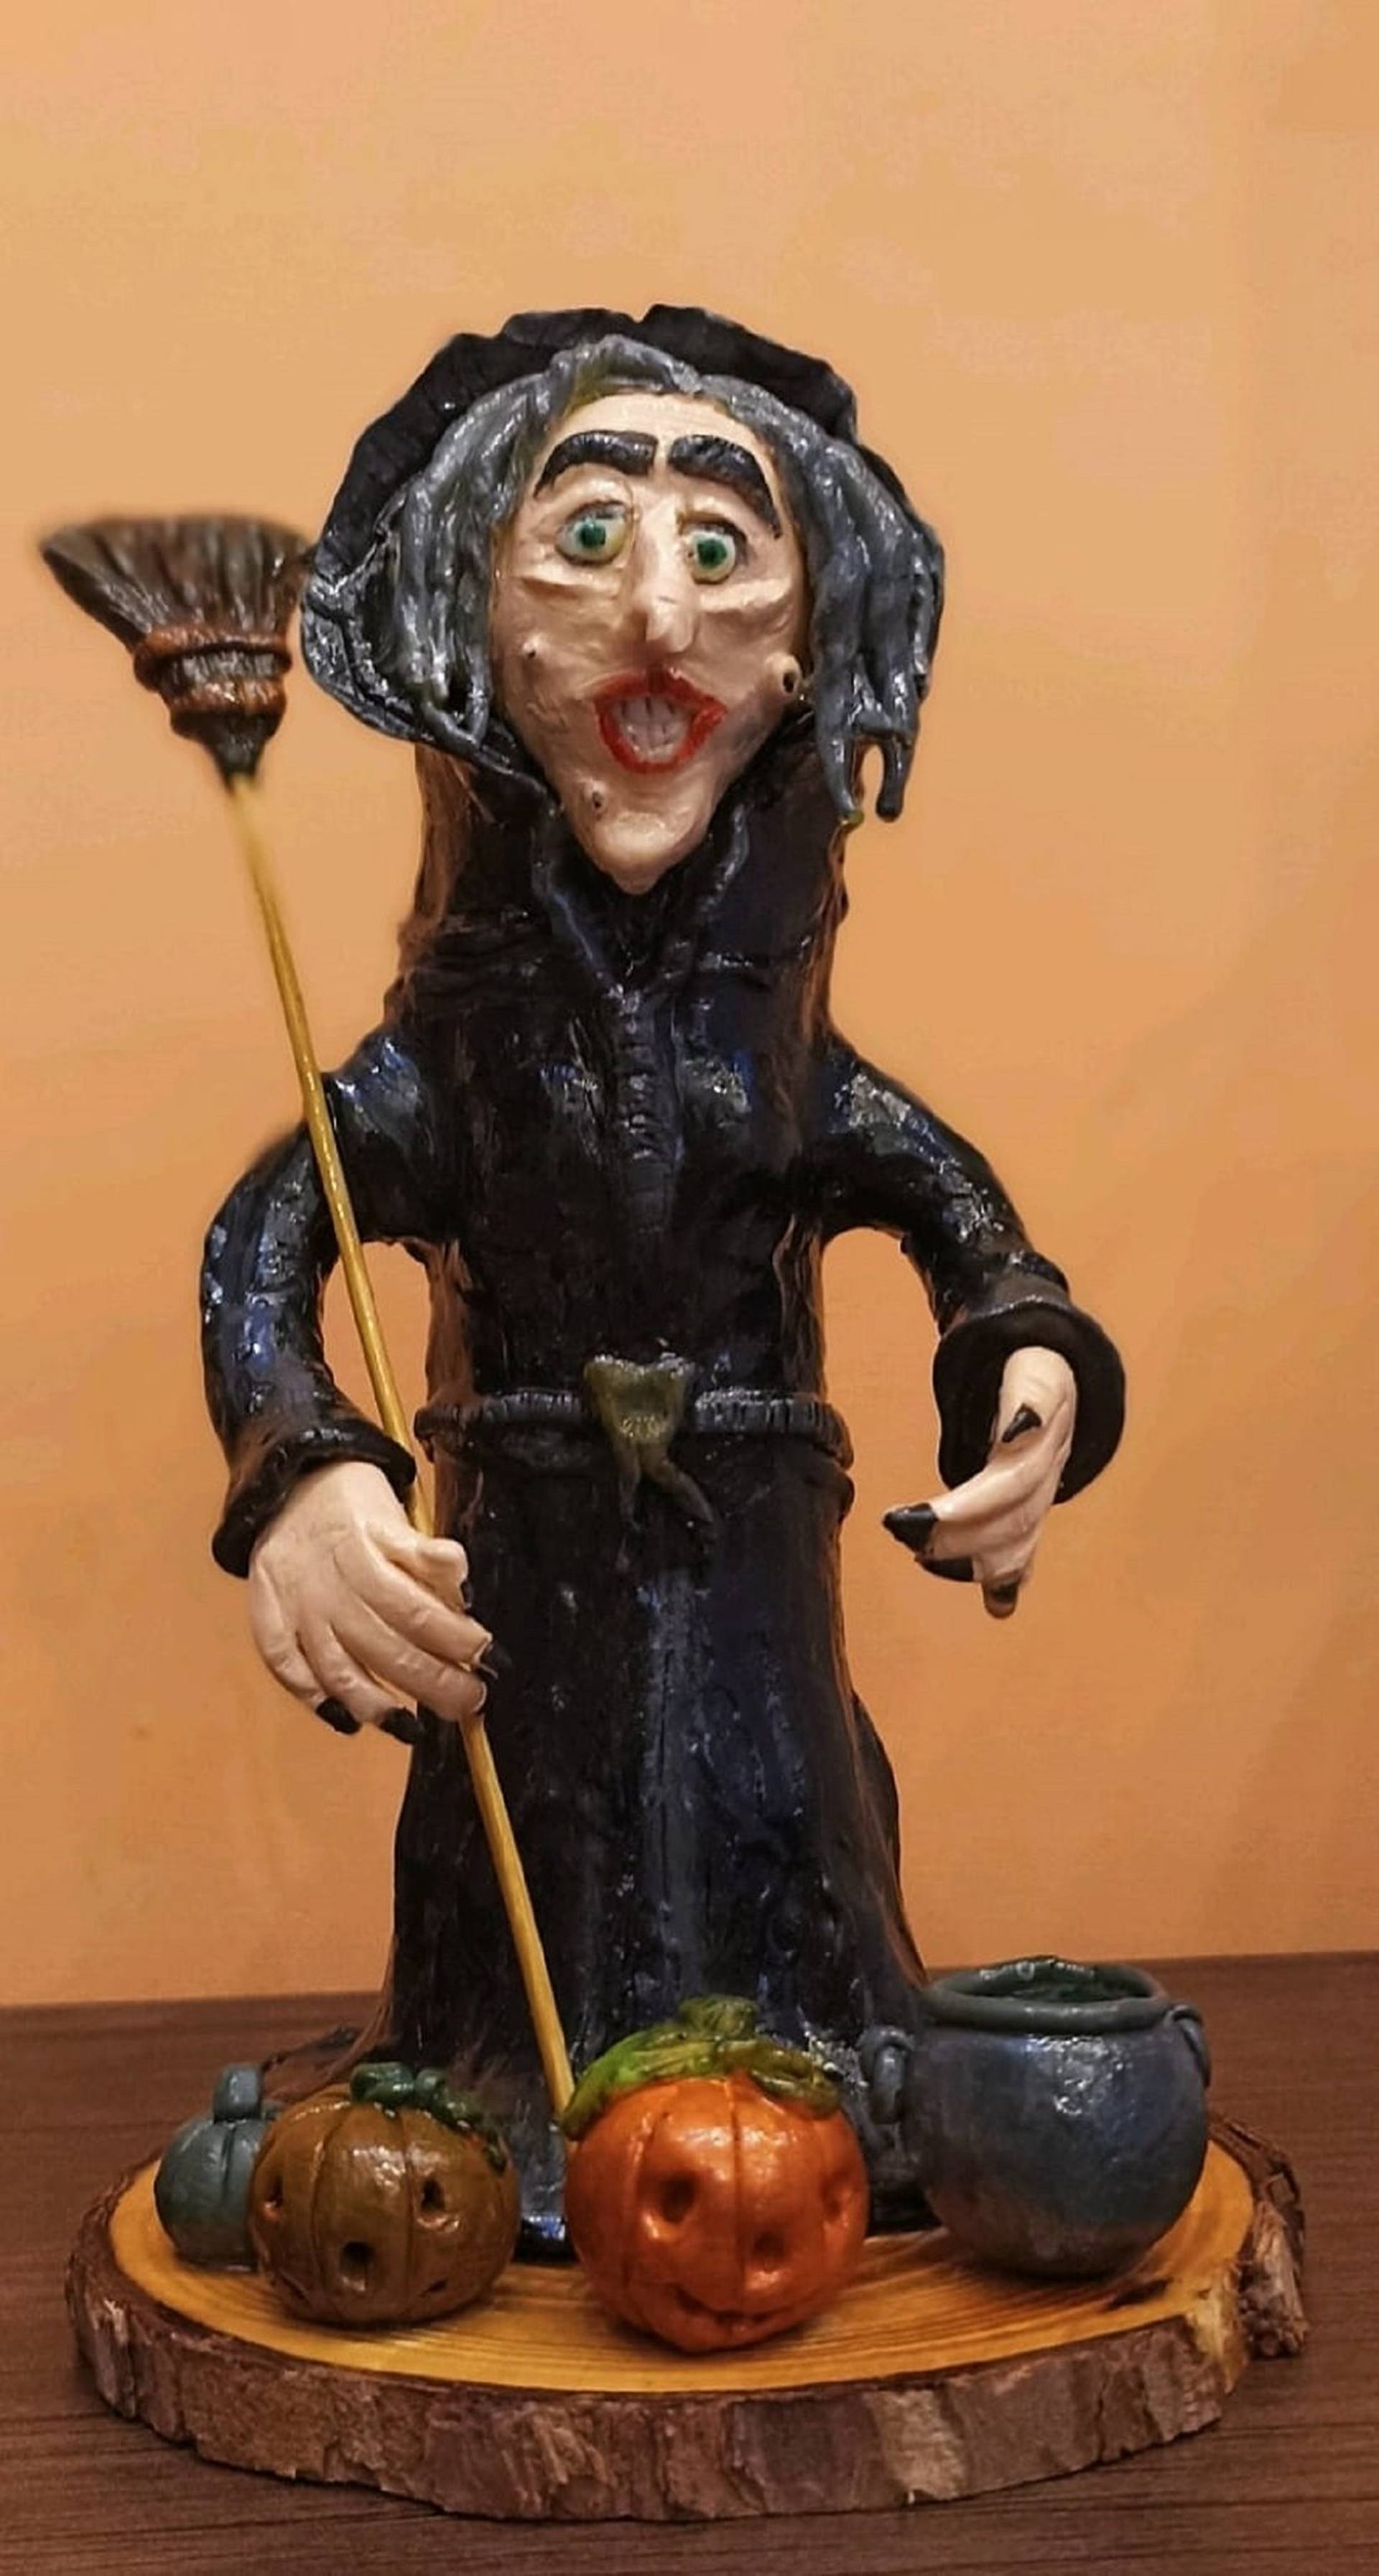 Limited Quantity. Hand sculptured Polymer Clay Witch-Pre order